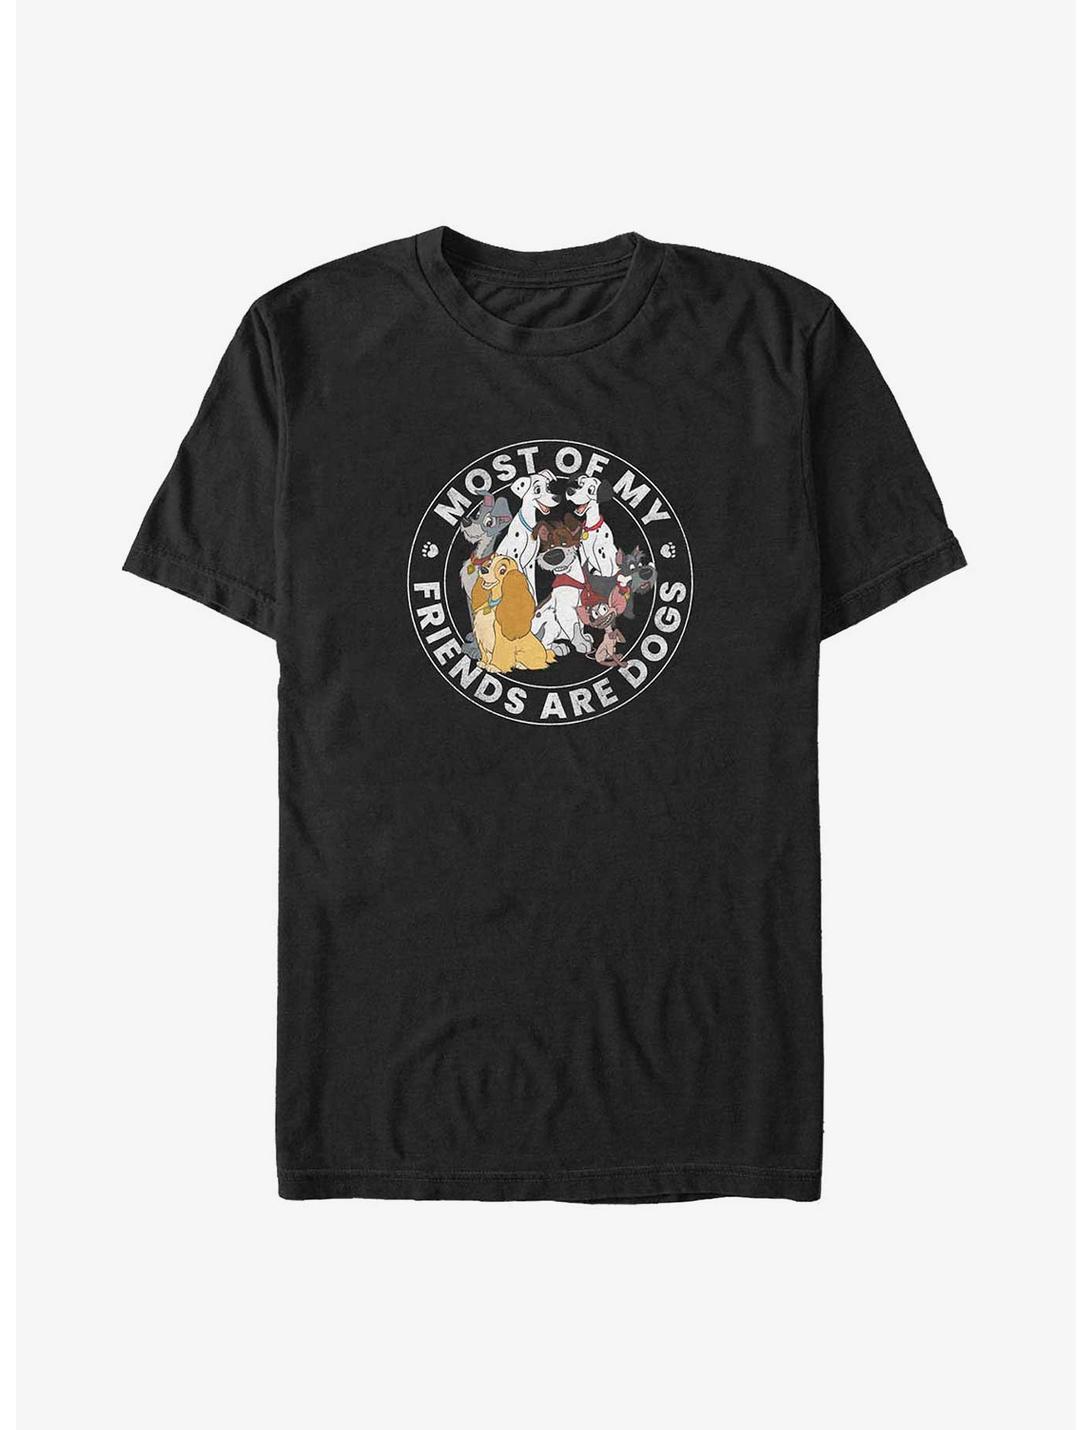 Disney Channel Most of My Friends Are Dogs Big & Tall T-Shirt, BLACK, hi-res